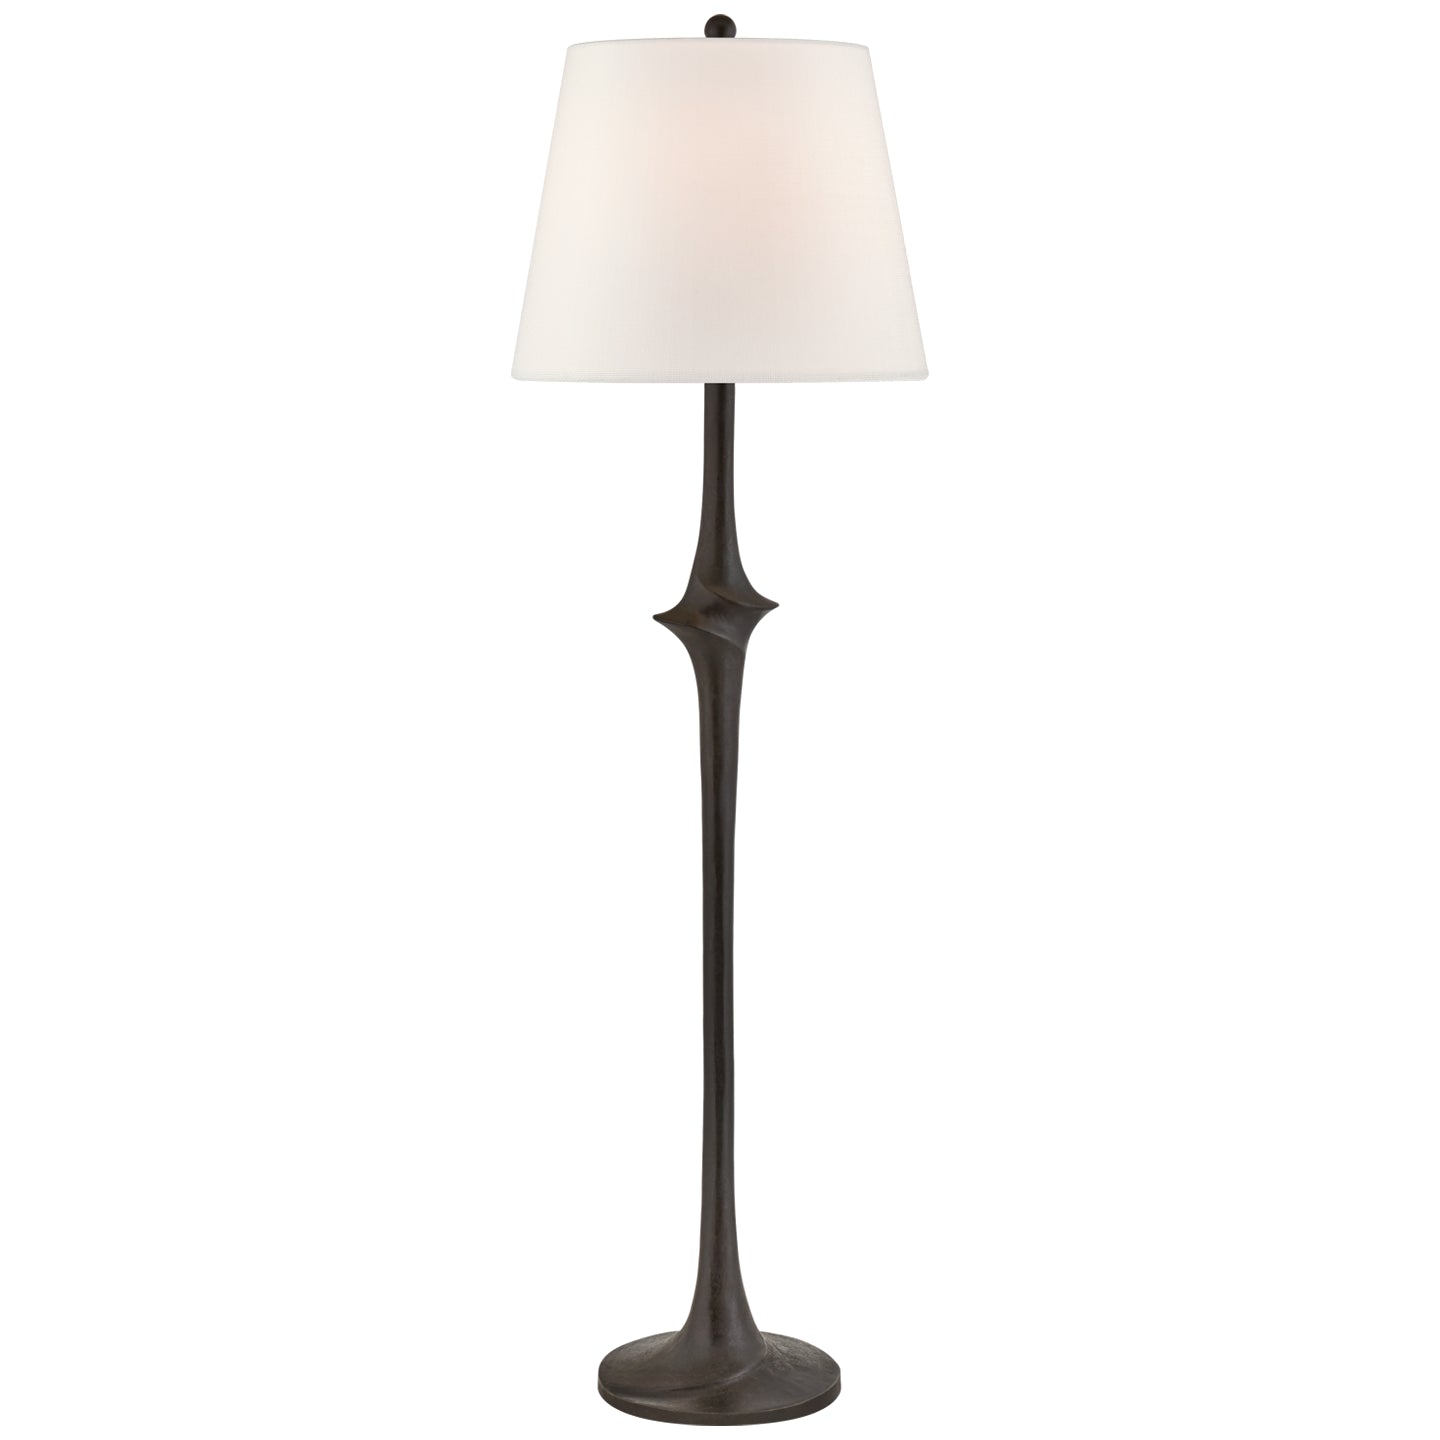 Load image into Gallery viewer, Visual Comfort Signature - CHA 9712AI-L - One Light Floor Lamp - Bates - Aged Iron
